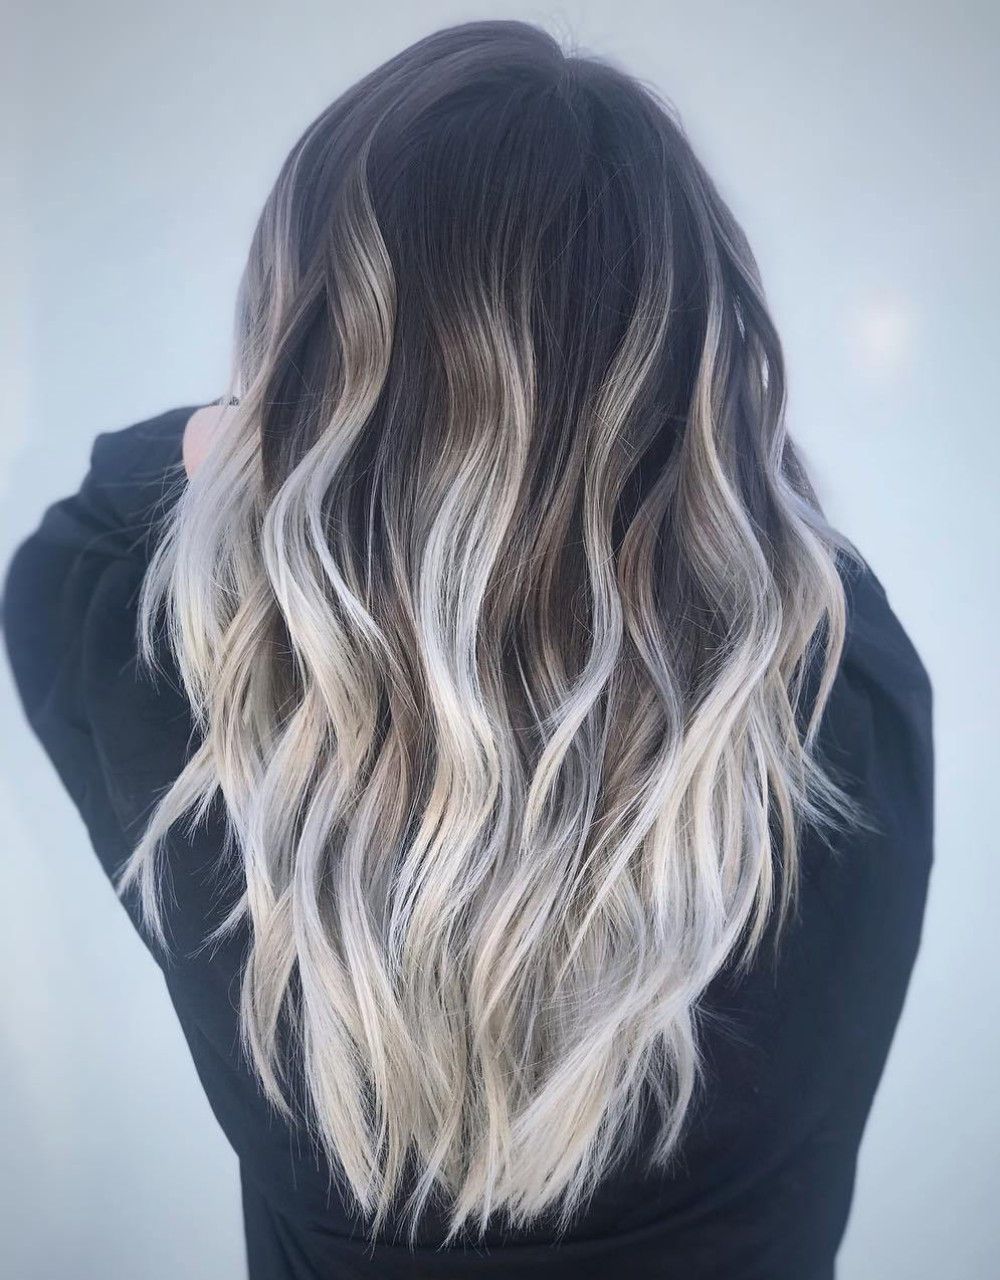 Hair Silver Colors - 70+ Stylish Inspirations and Many Care Tips ...